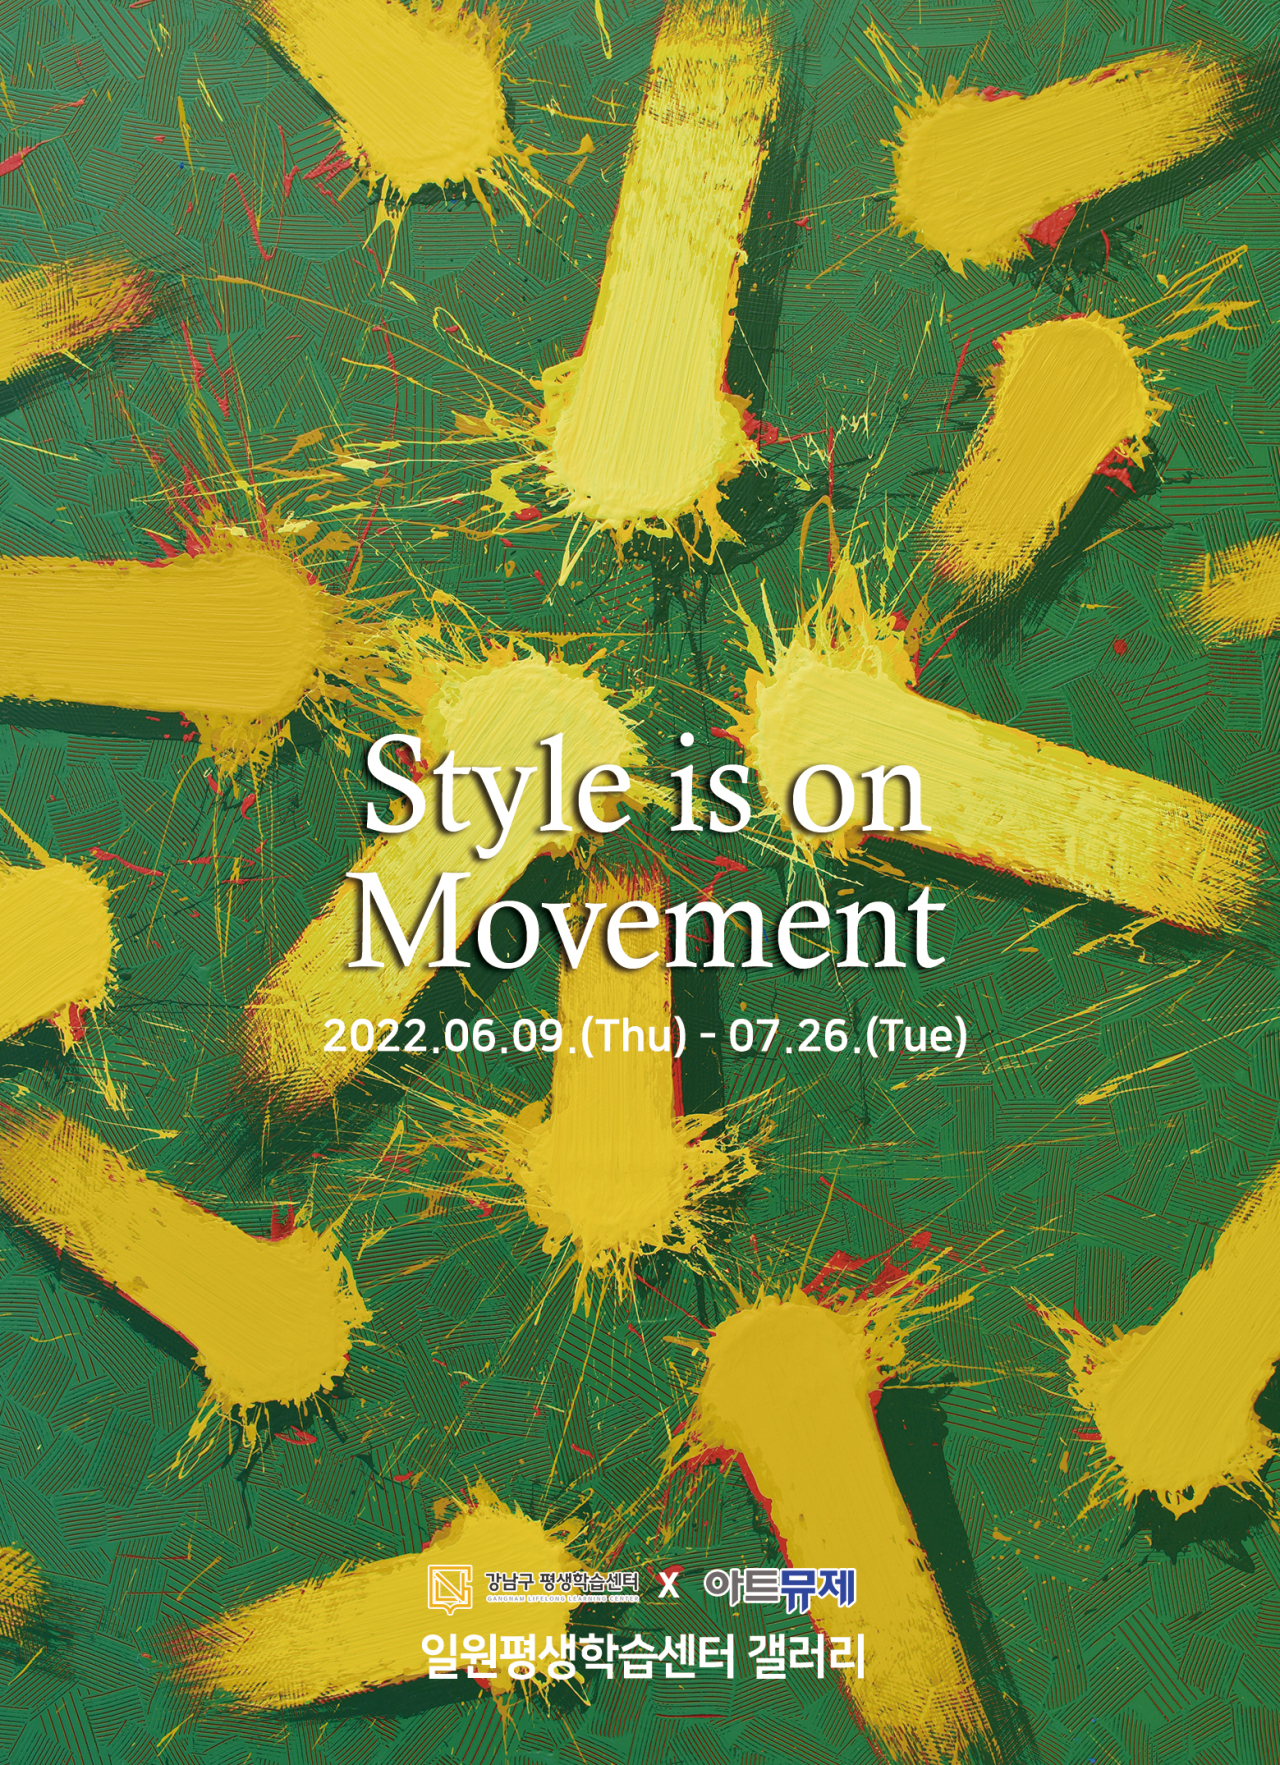 STYLE IS ON MOVEMENT